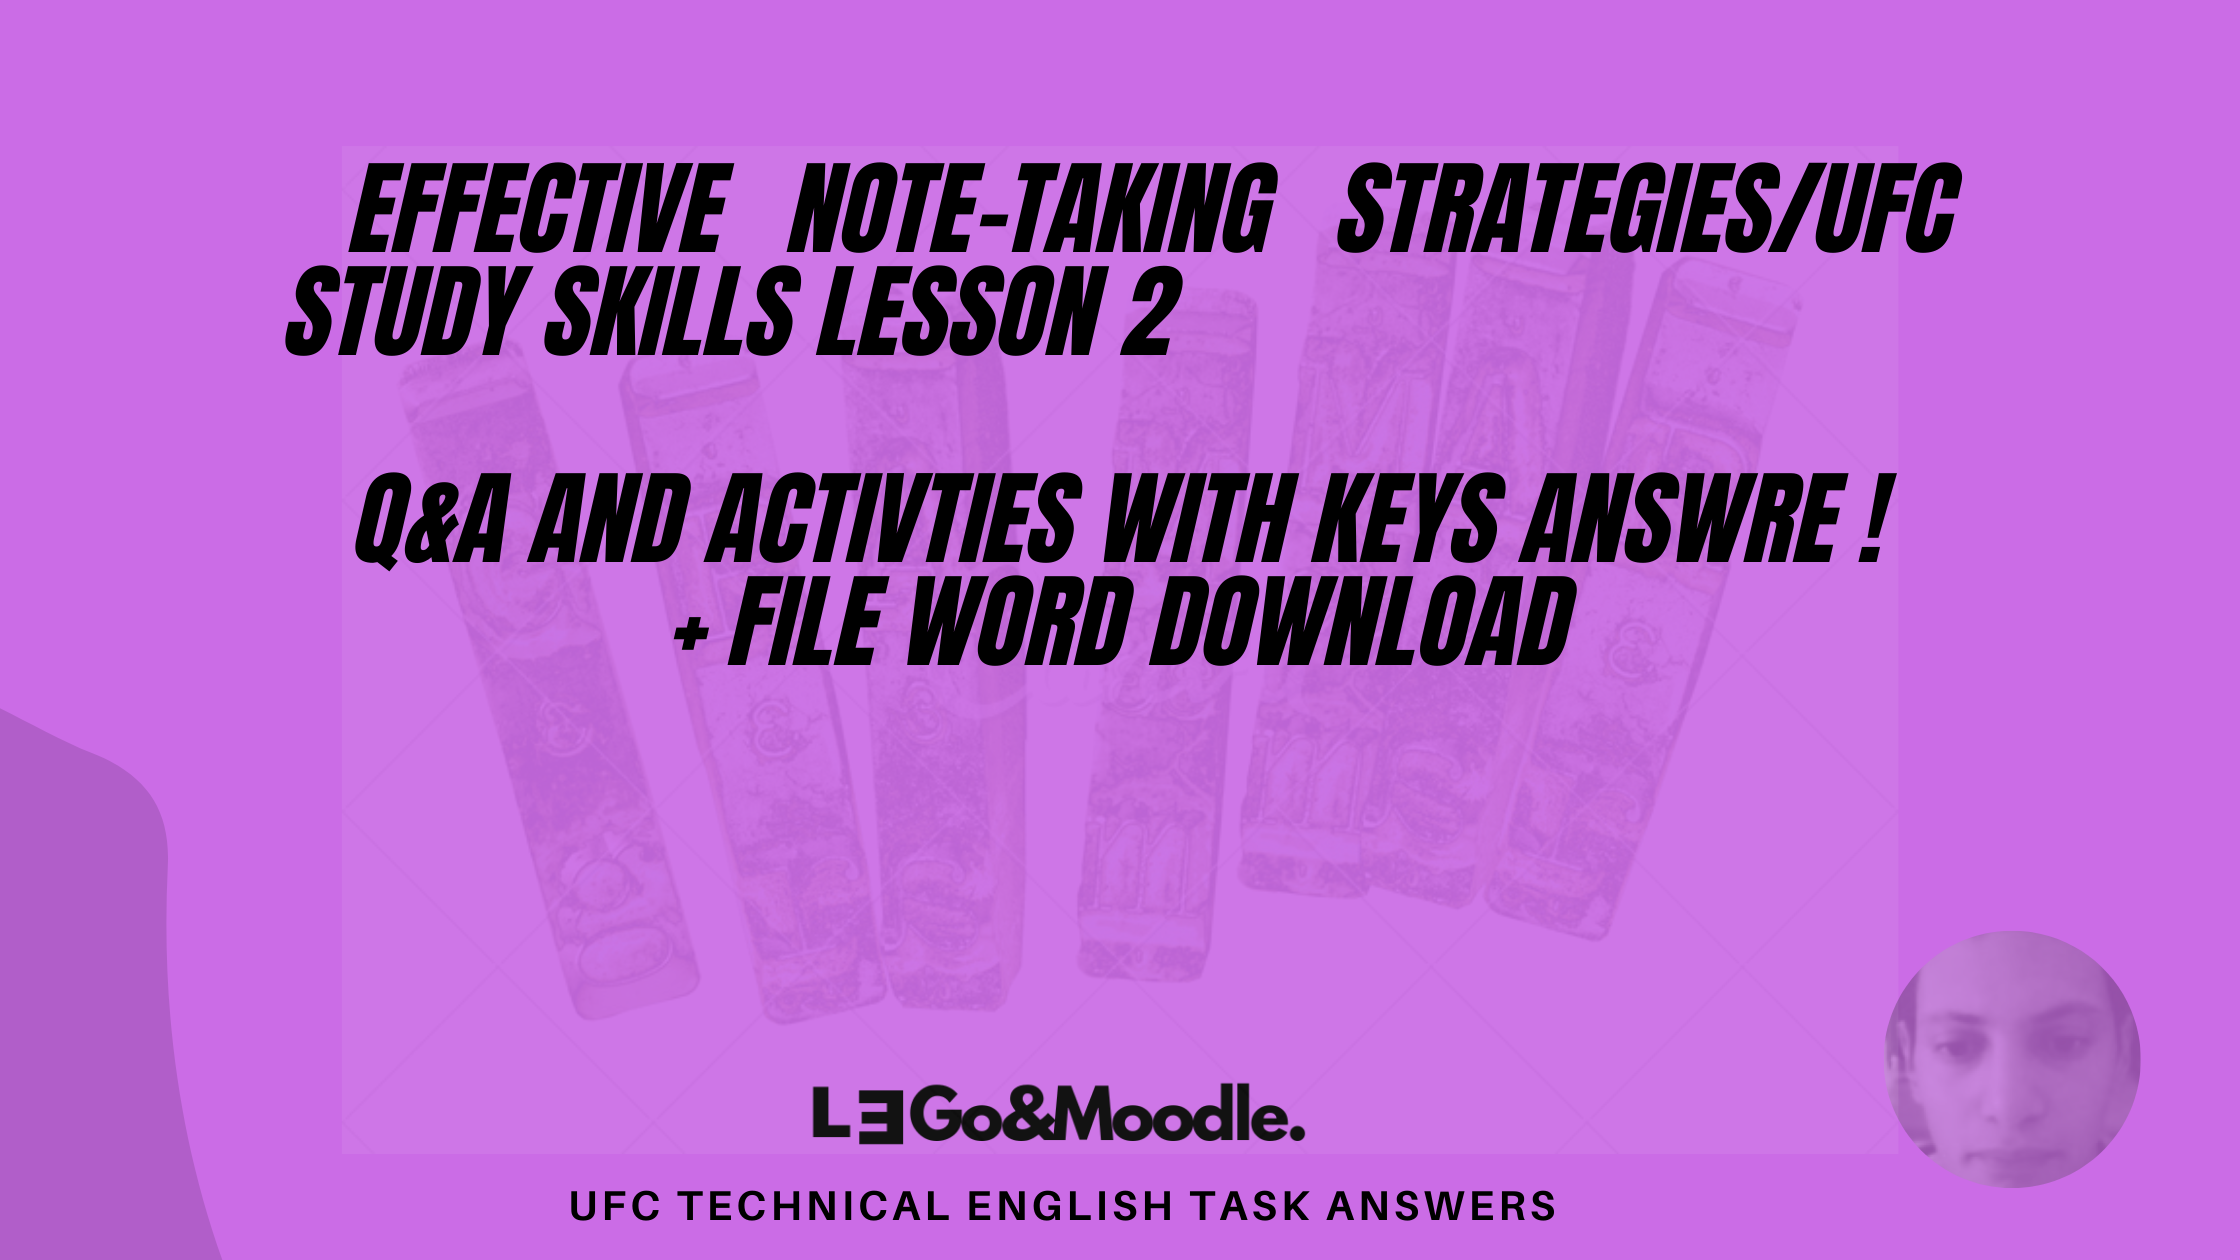 Effective Note-Taking Strategies/UFC study skills lesson 2